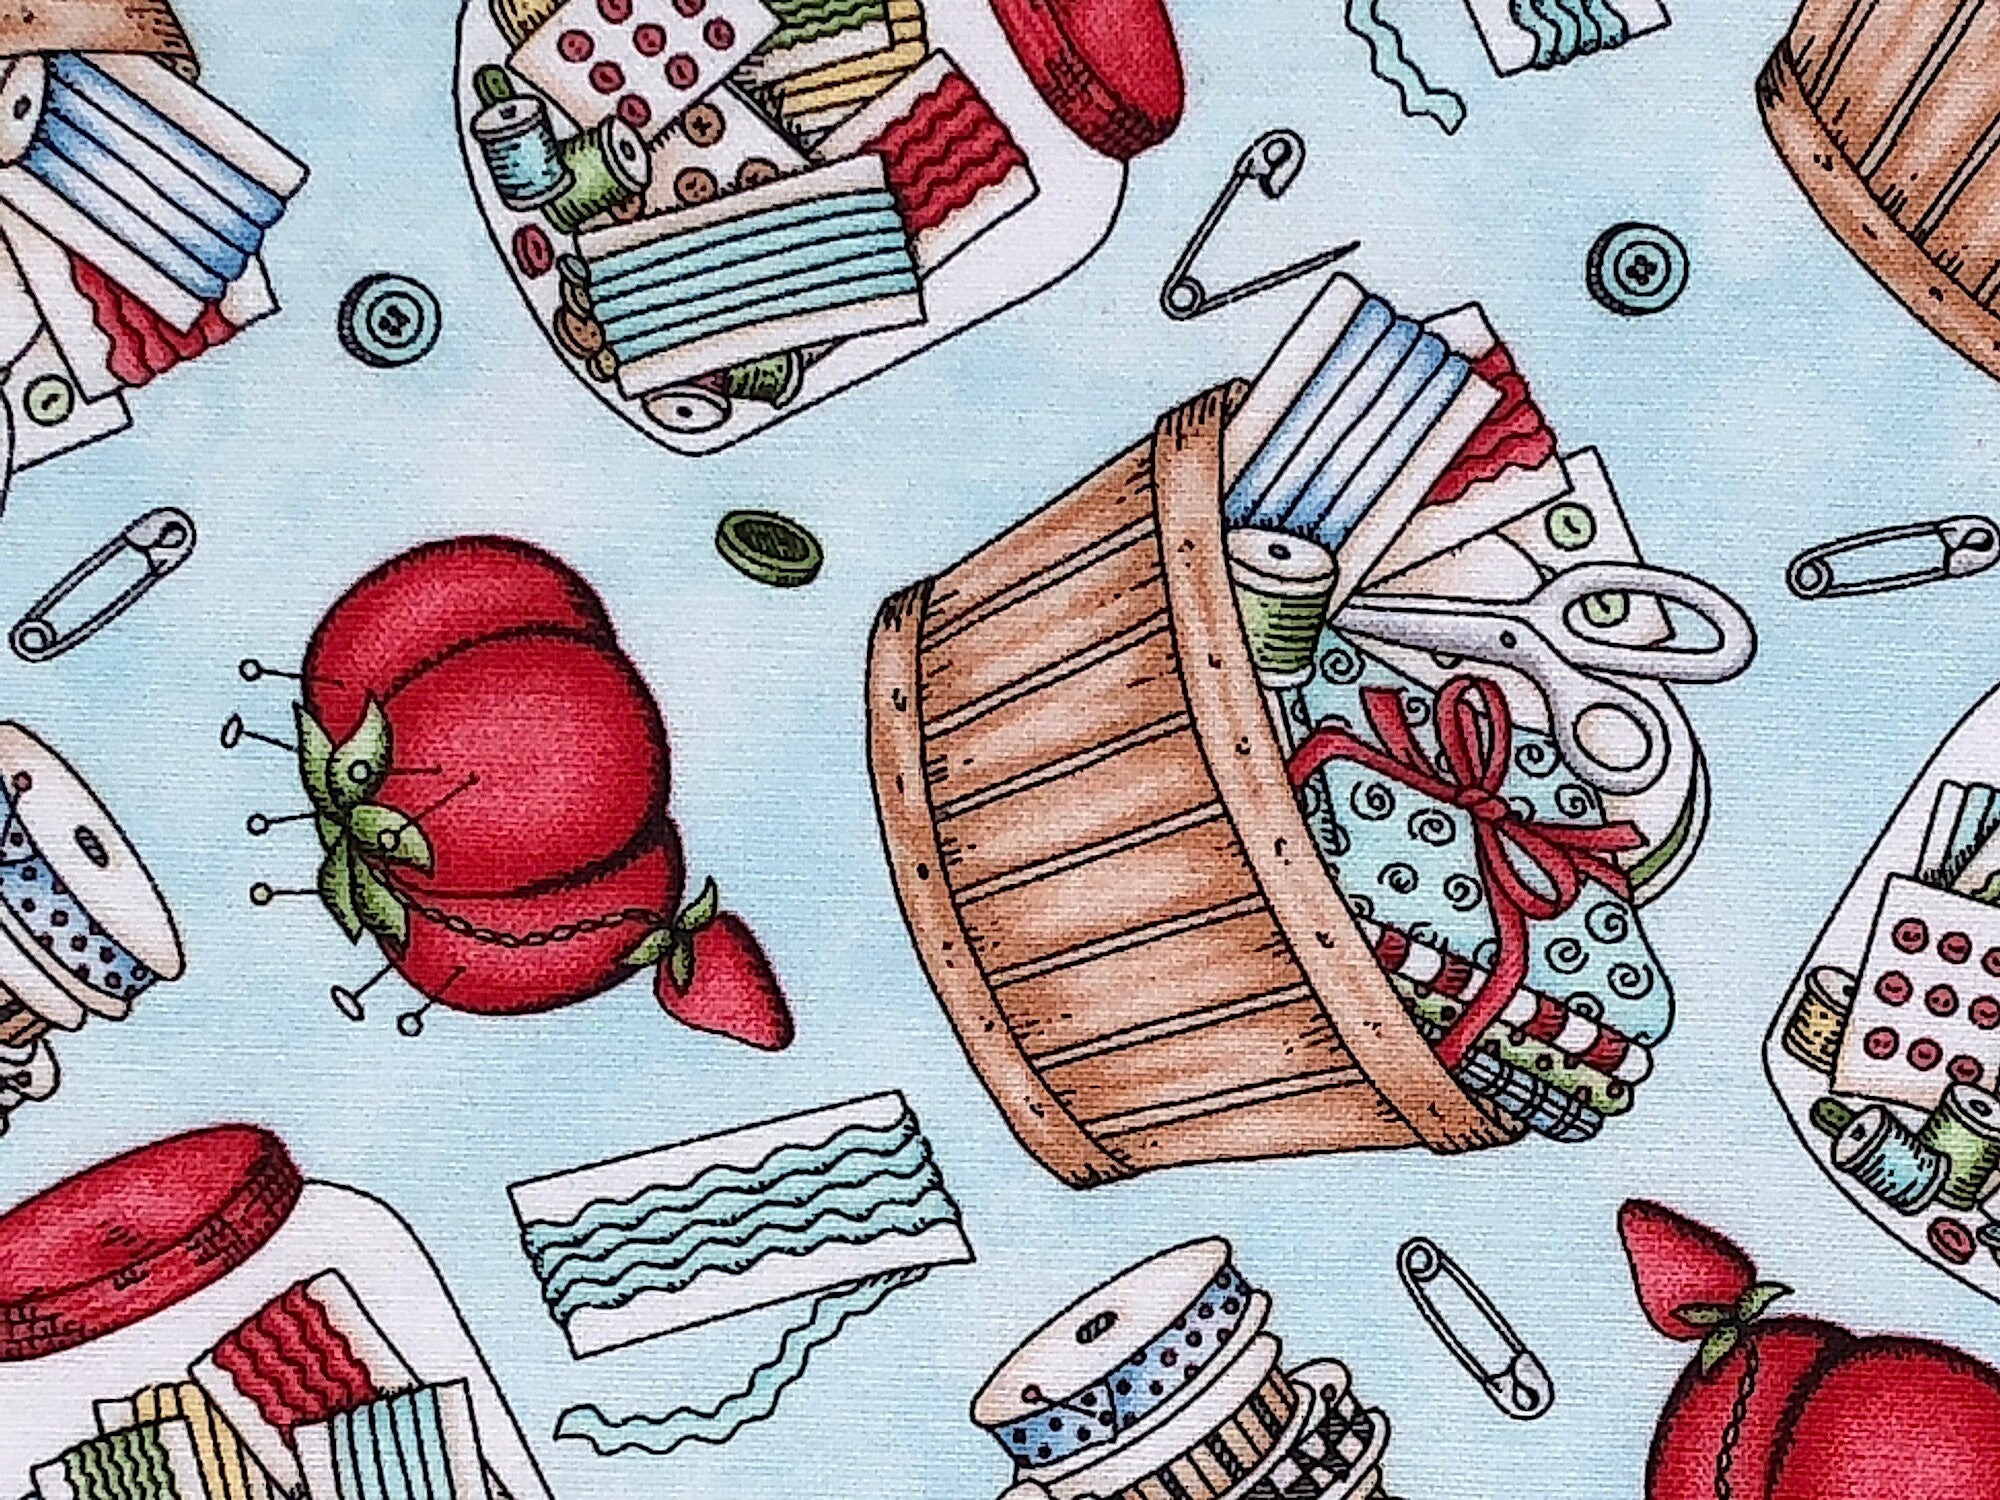 This fabric is covered with sewing notions such as buttons, thread, scissors, pincushions, fabric and more. There are also baskets and jars filled with sewing notions. 